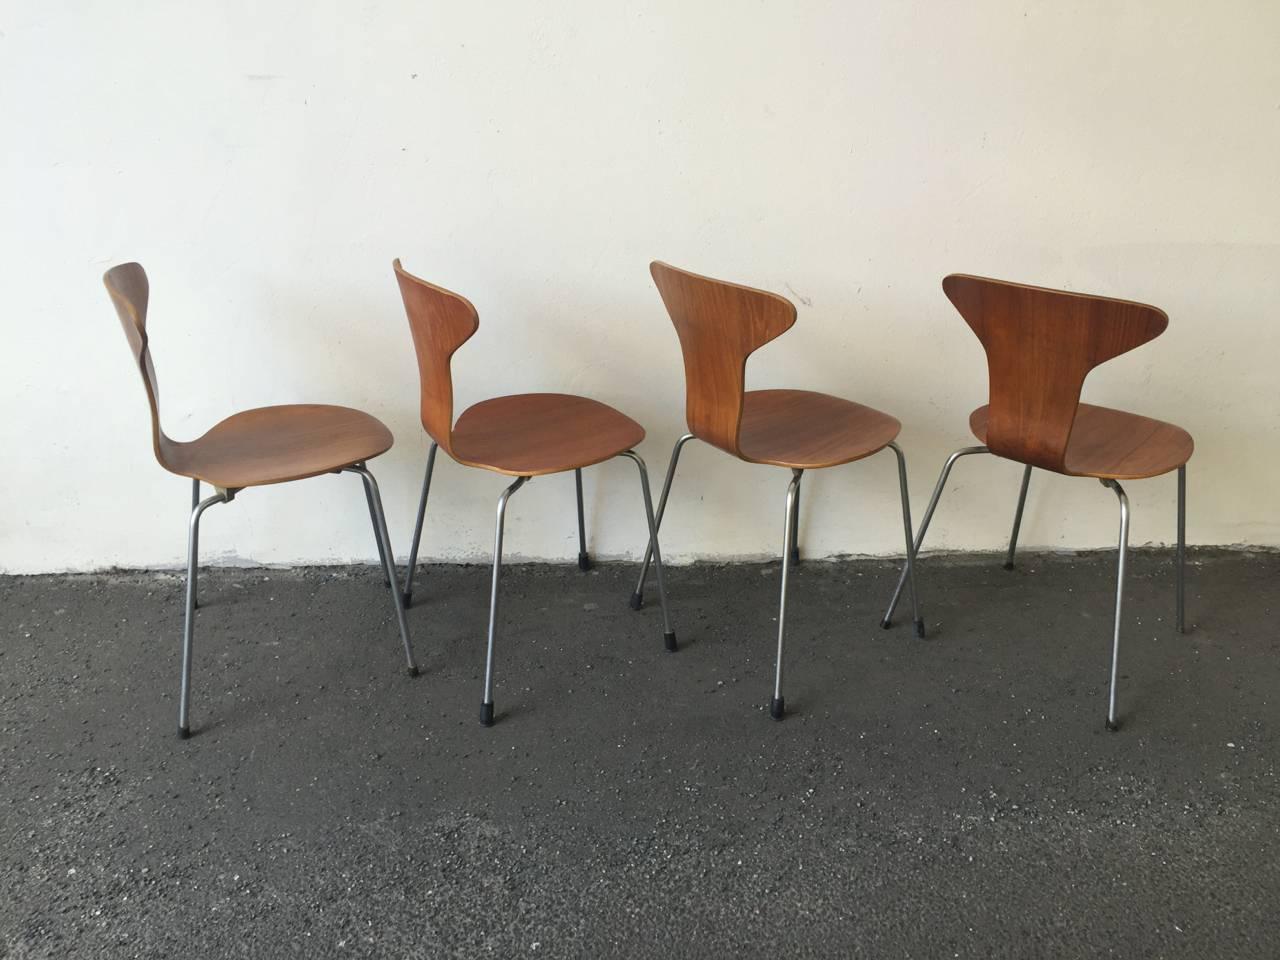 20th Century Set of Four No. 3105 Munkegaard or Mosquito Chairs by Arne Jacobsen